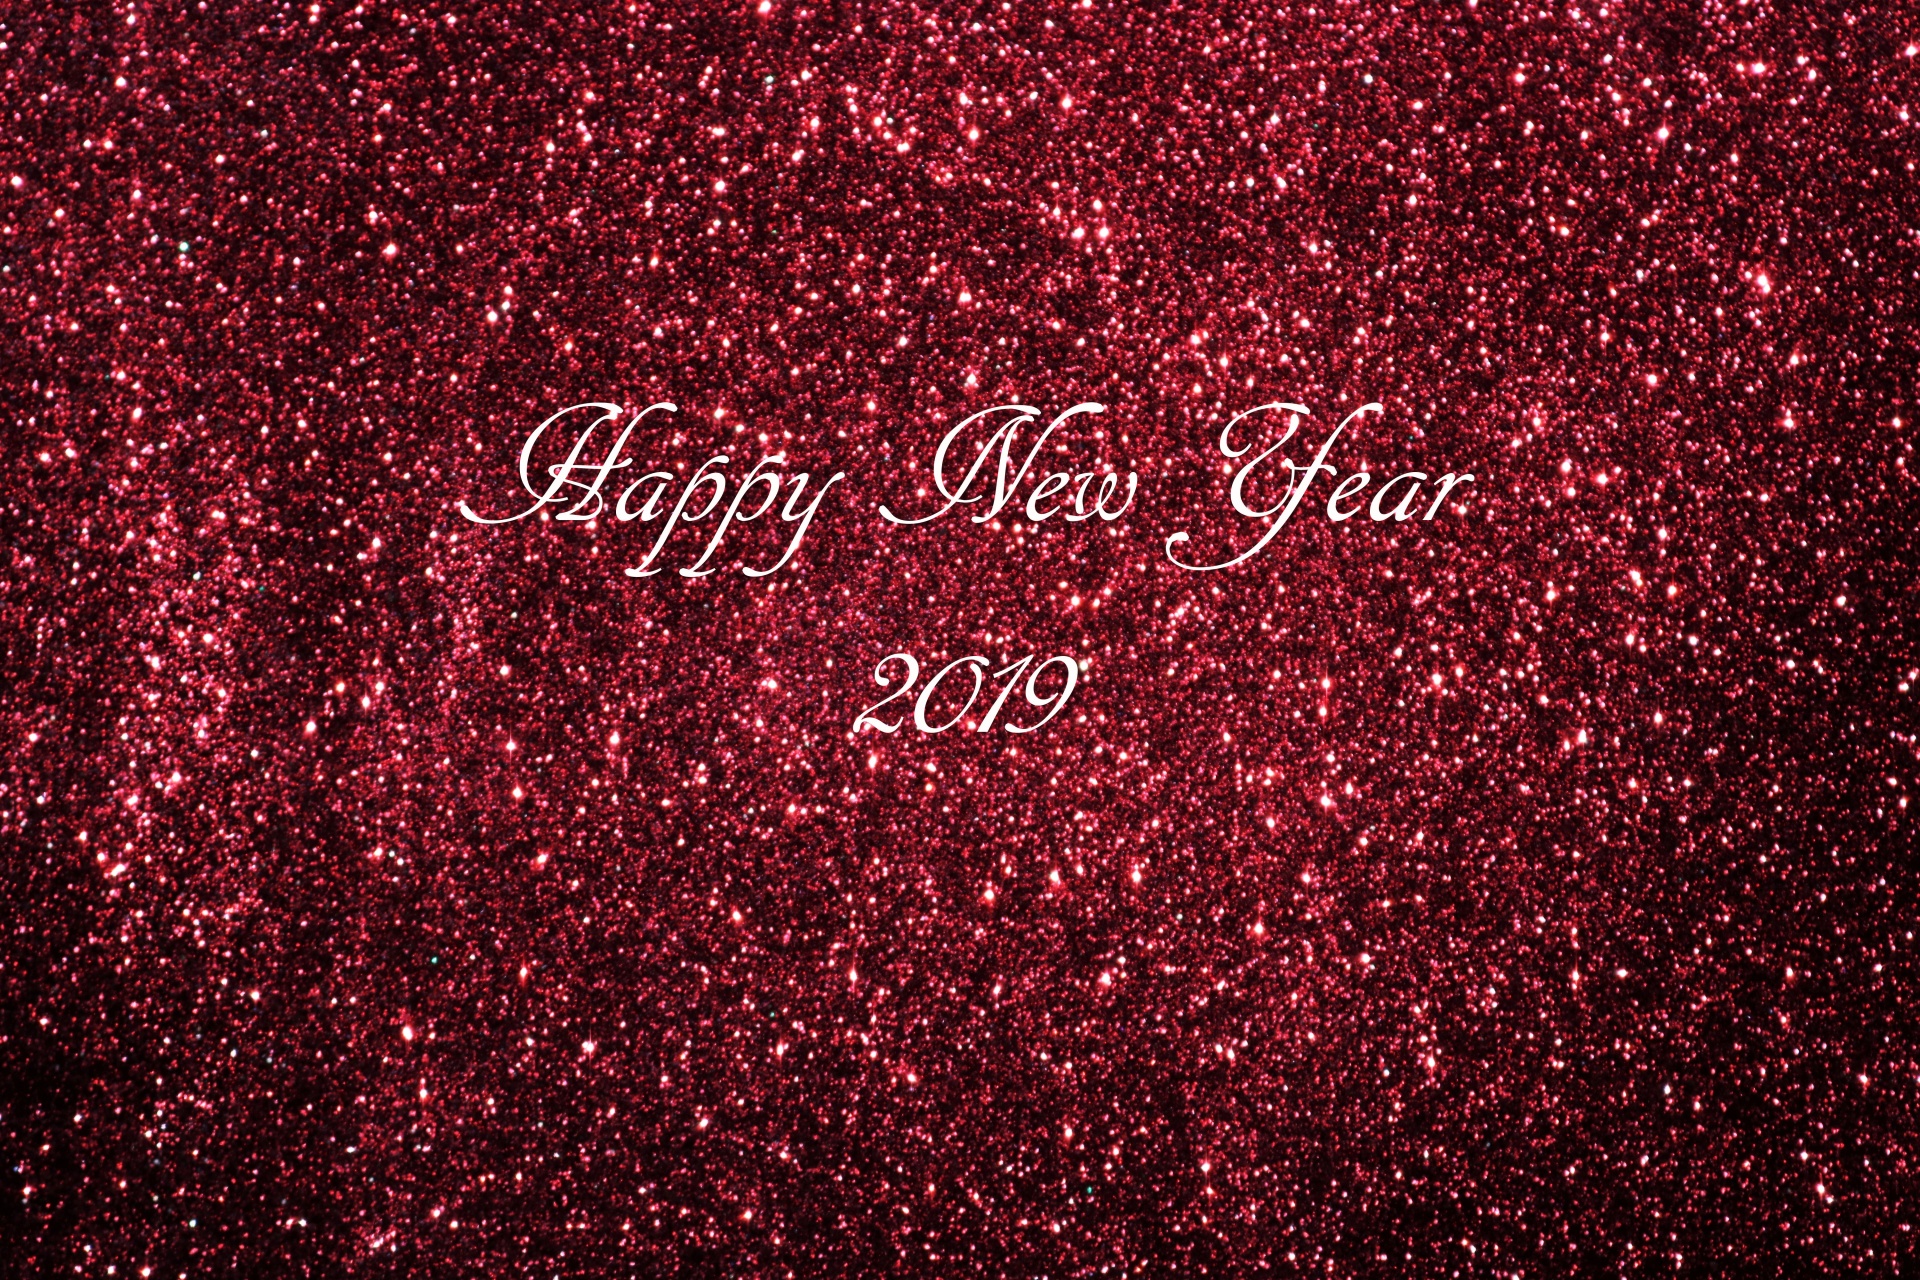 A sparkling burgundy glitter background with Happy New Year 2019 text in silver.